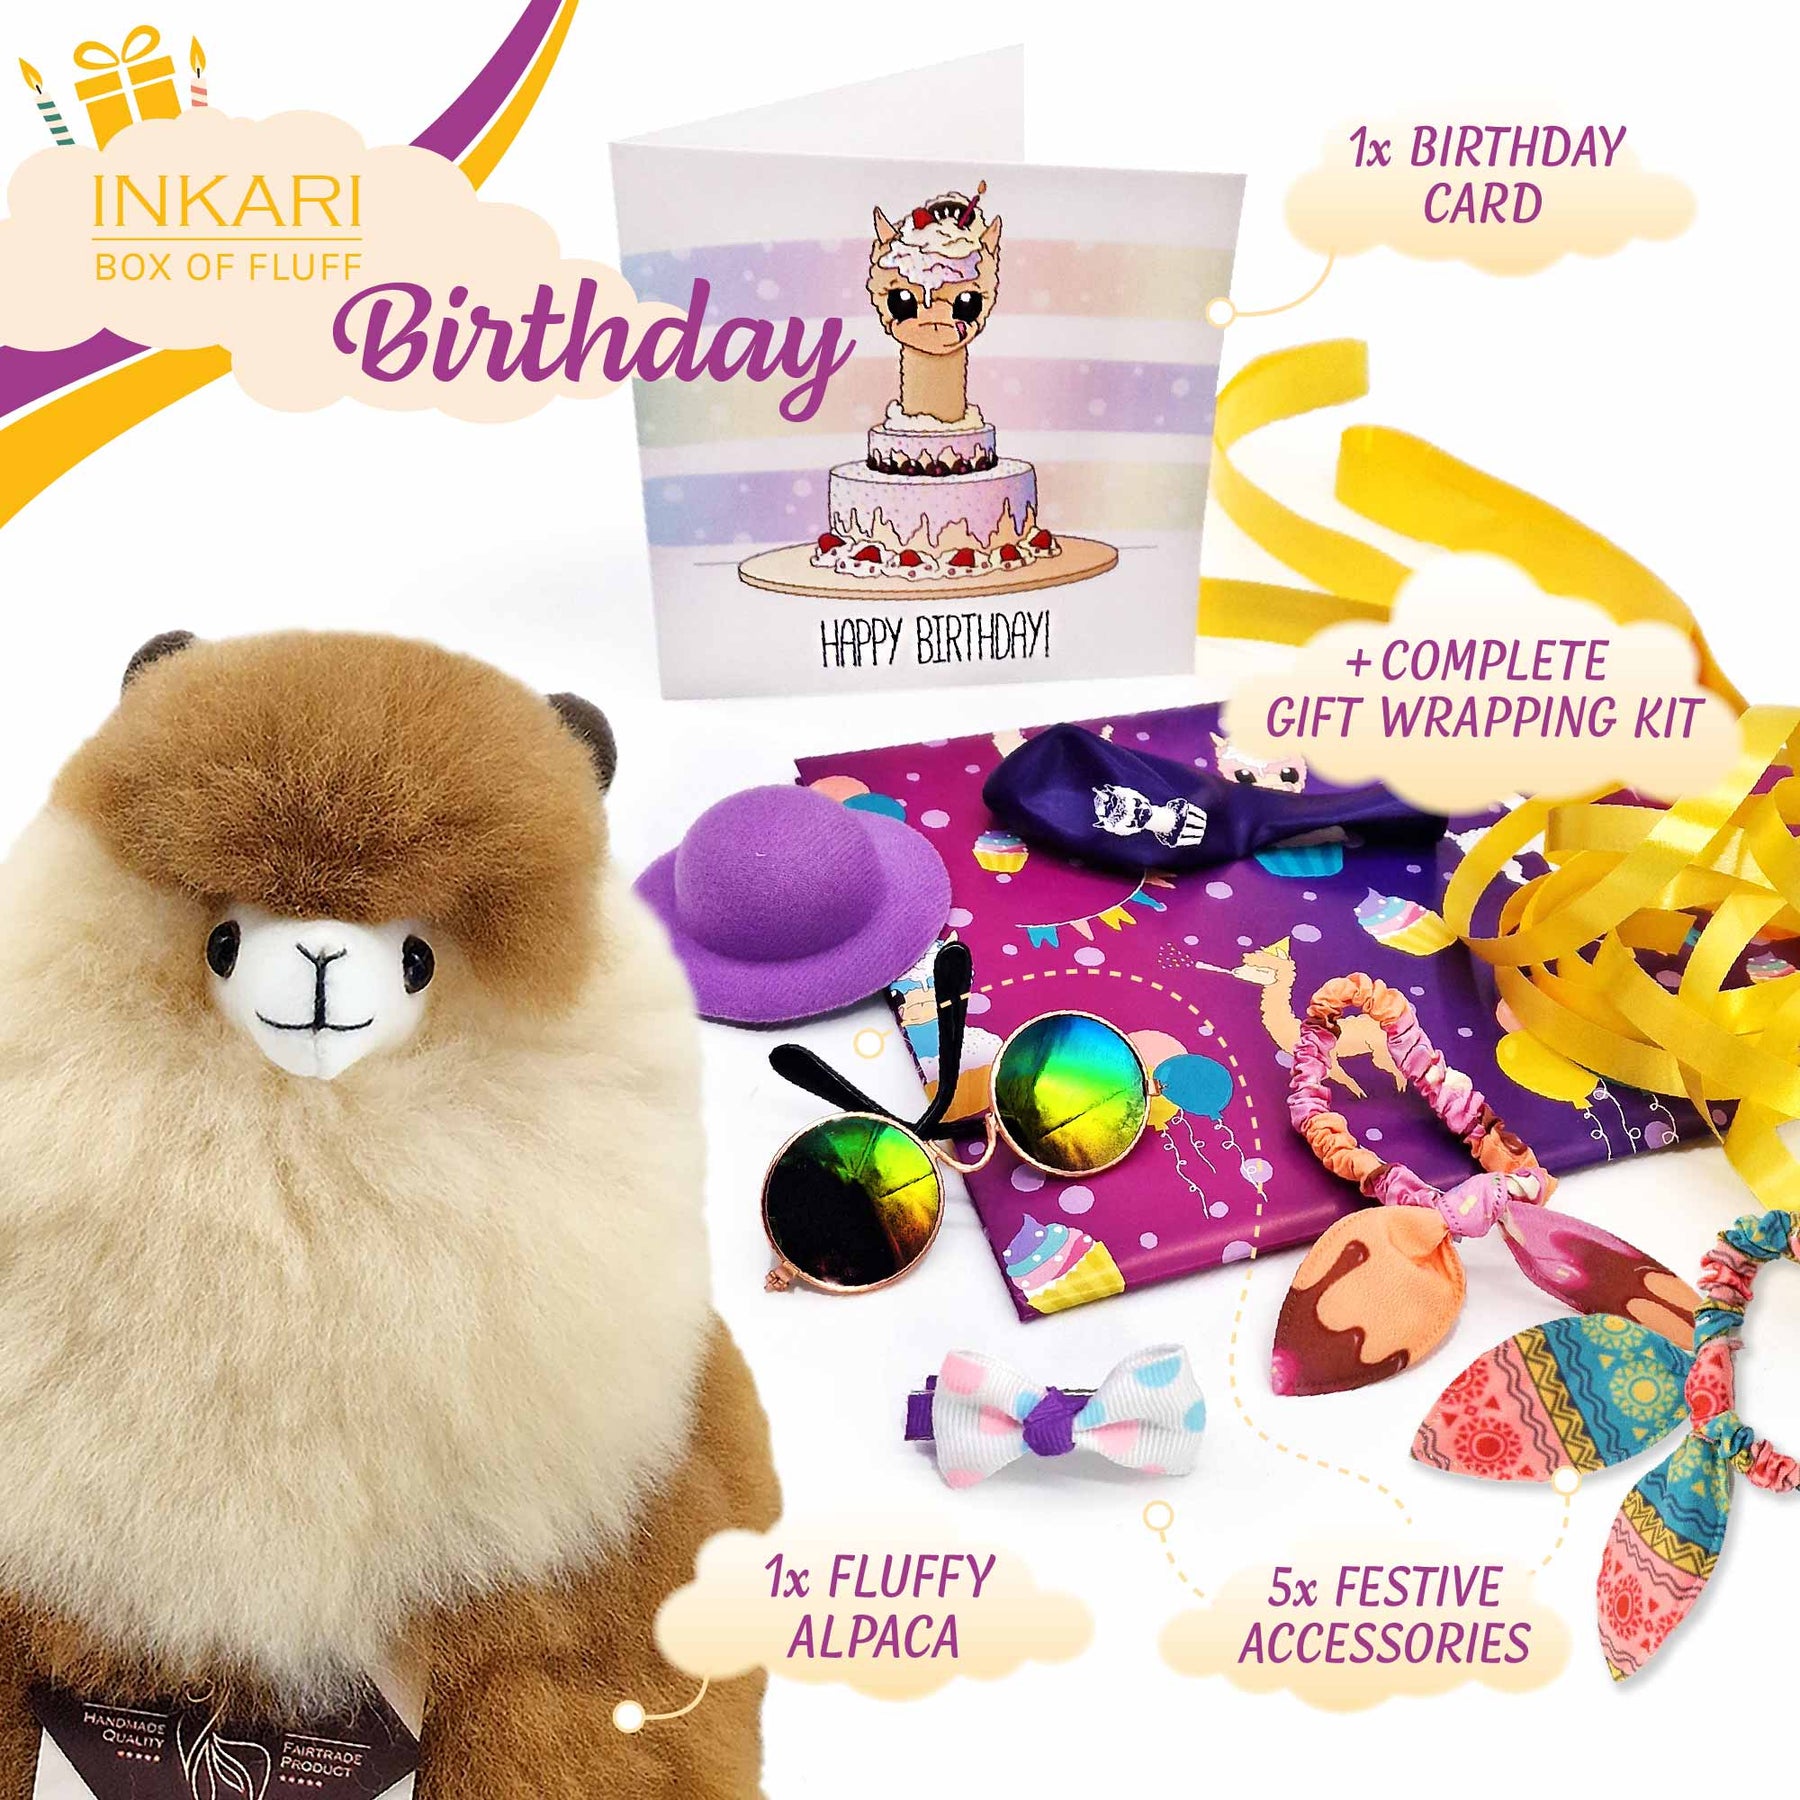 INT 12 Shiny Lucαrio Plush Toy,Soft Stuff Animal Collectible Birthday Gift  